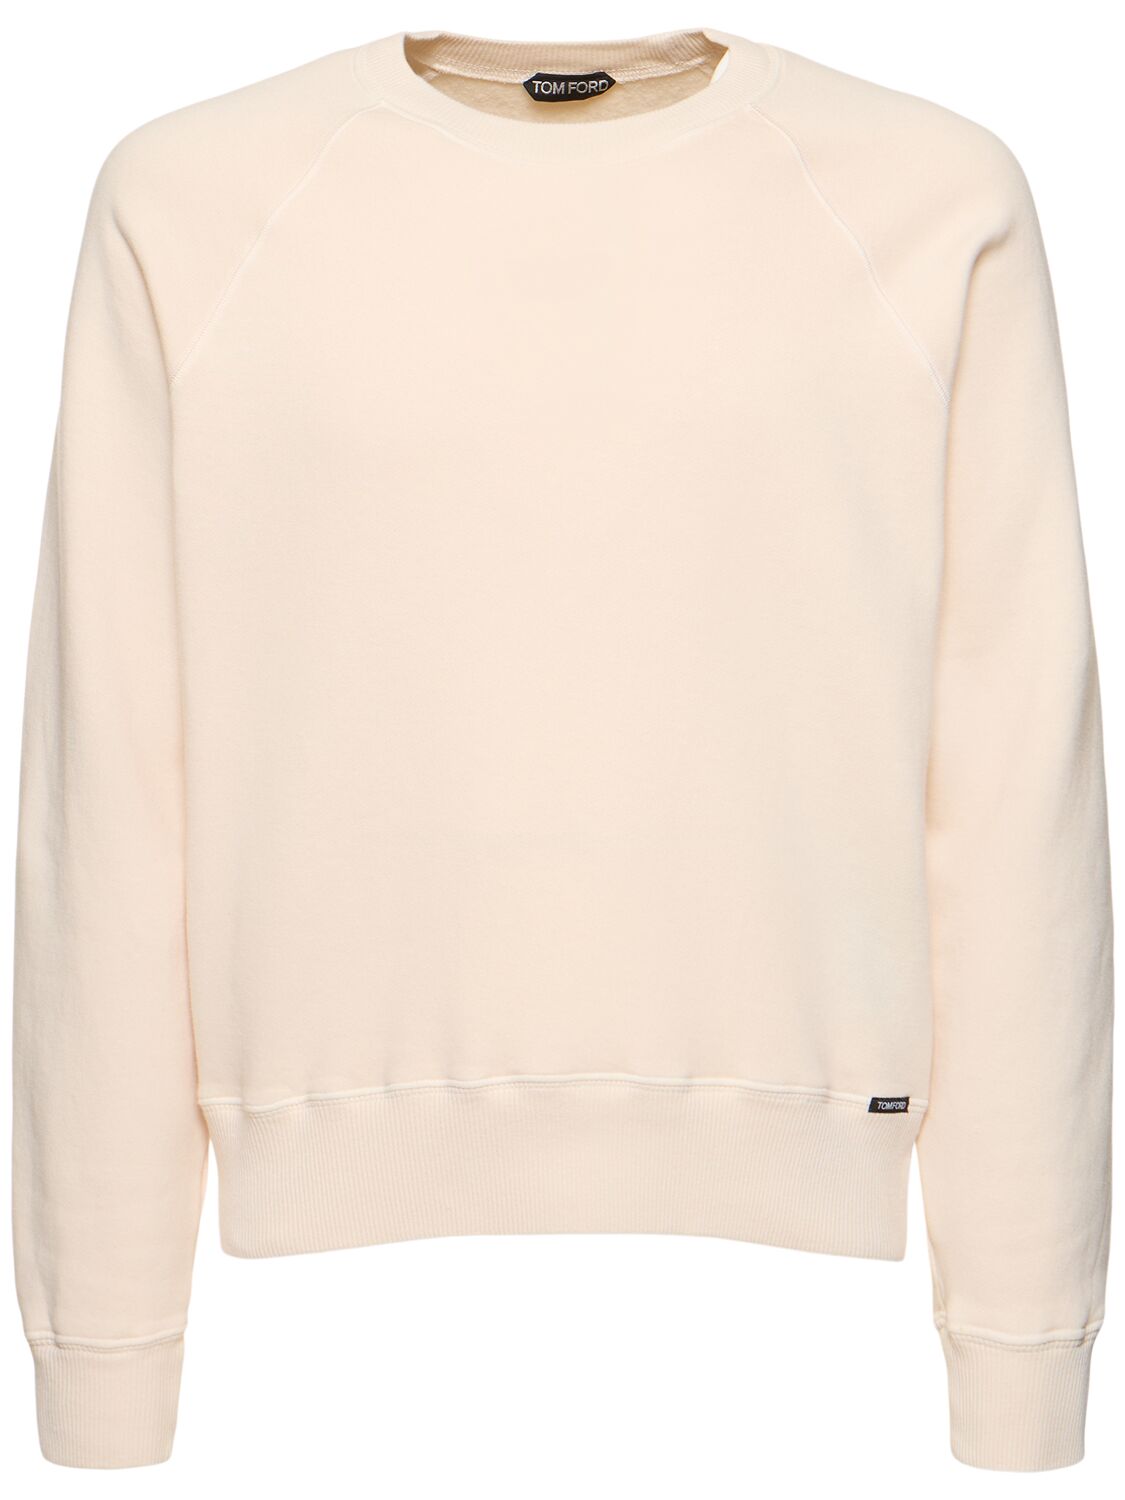 Tom Ford Vintage Garment Dyed Cotton Sweatshirt In Ivory